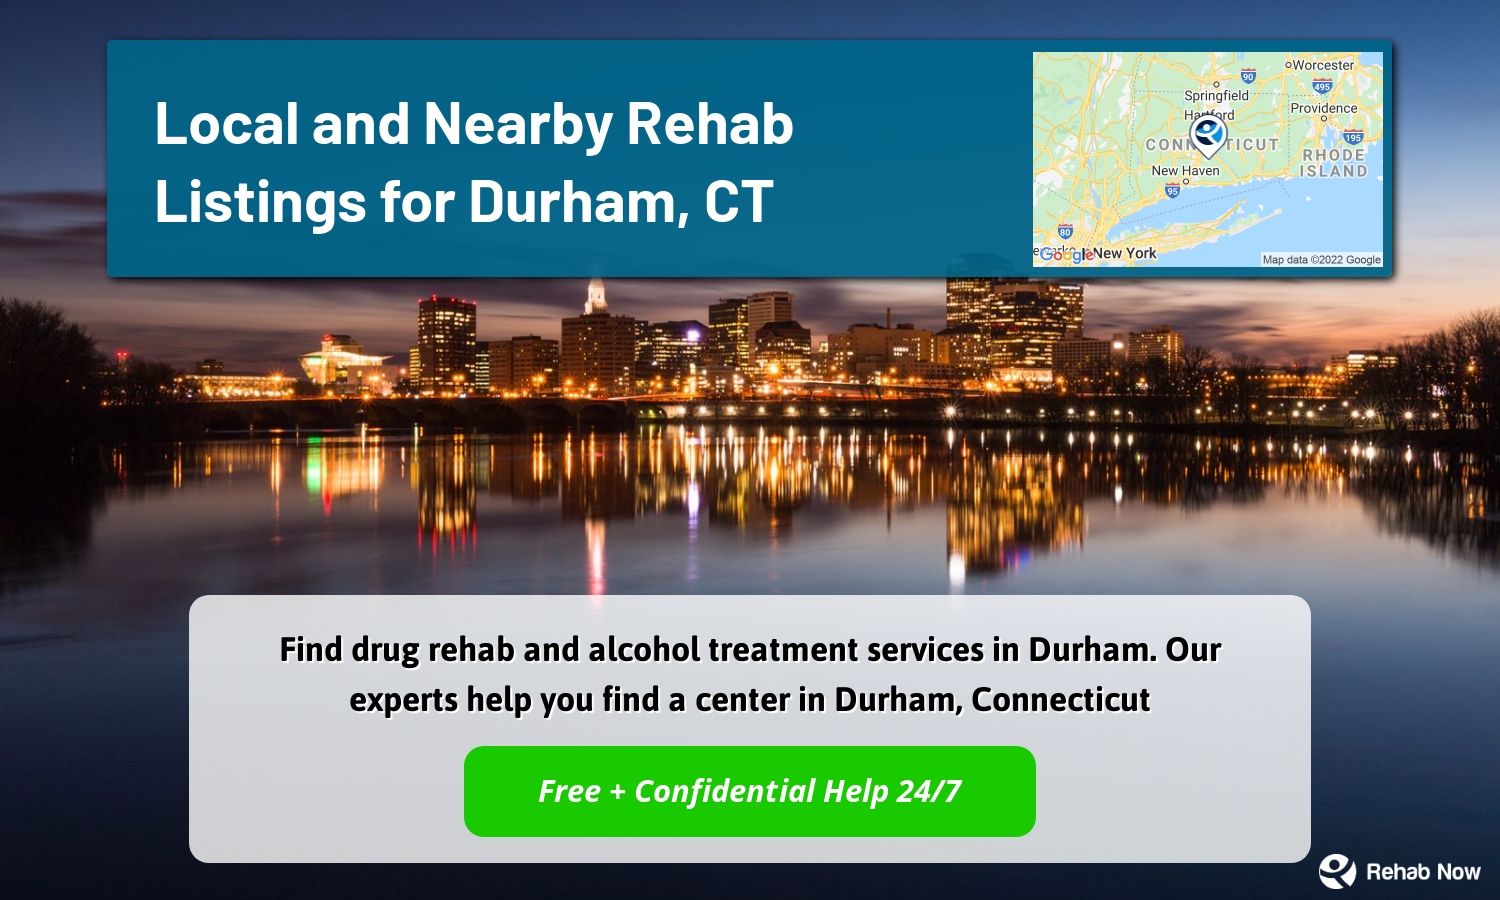 Find drug rehab and alcohol treatment services in Durham. Our experts help you find a center in Durham, Connecticut